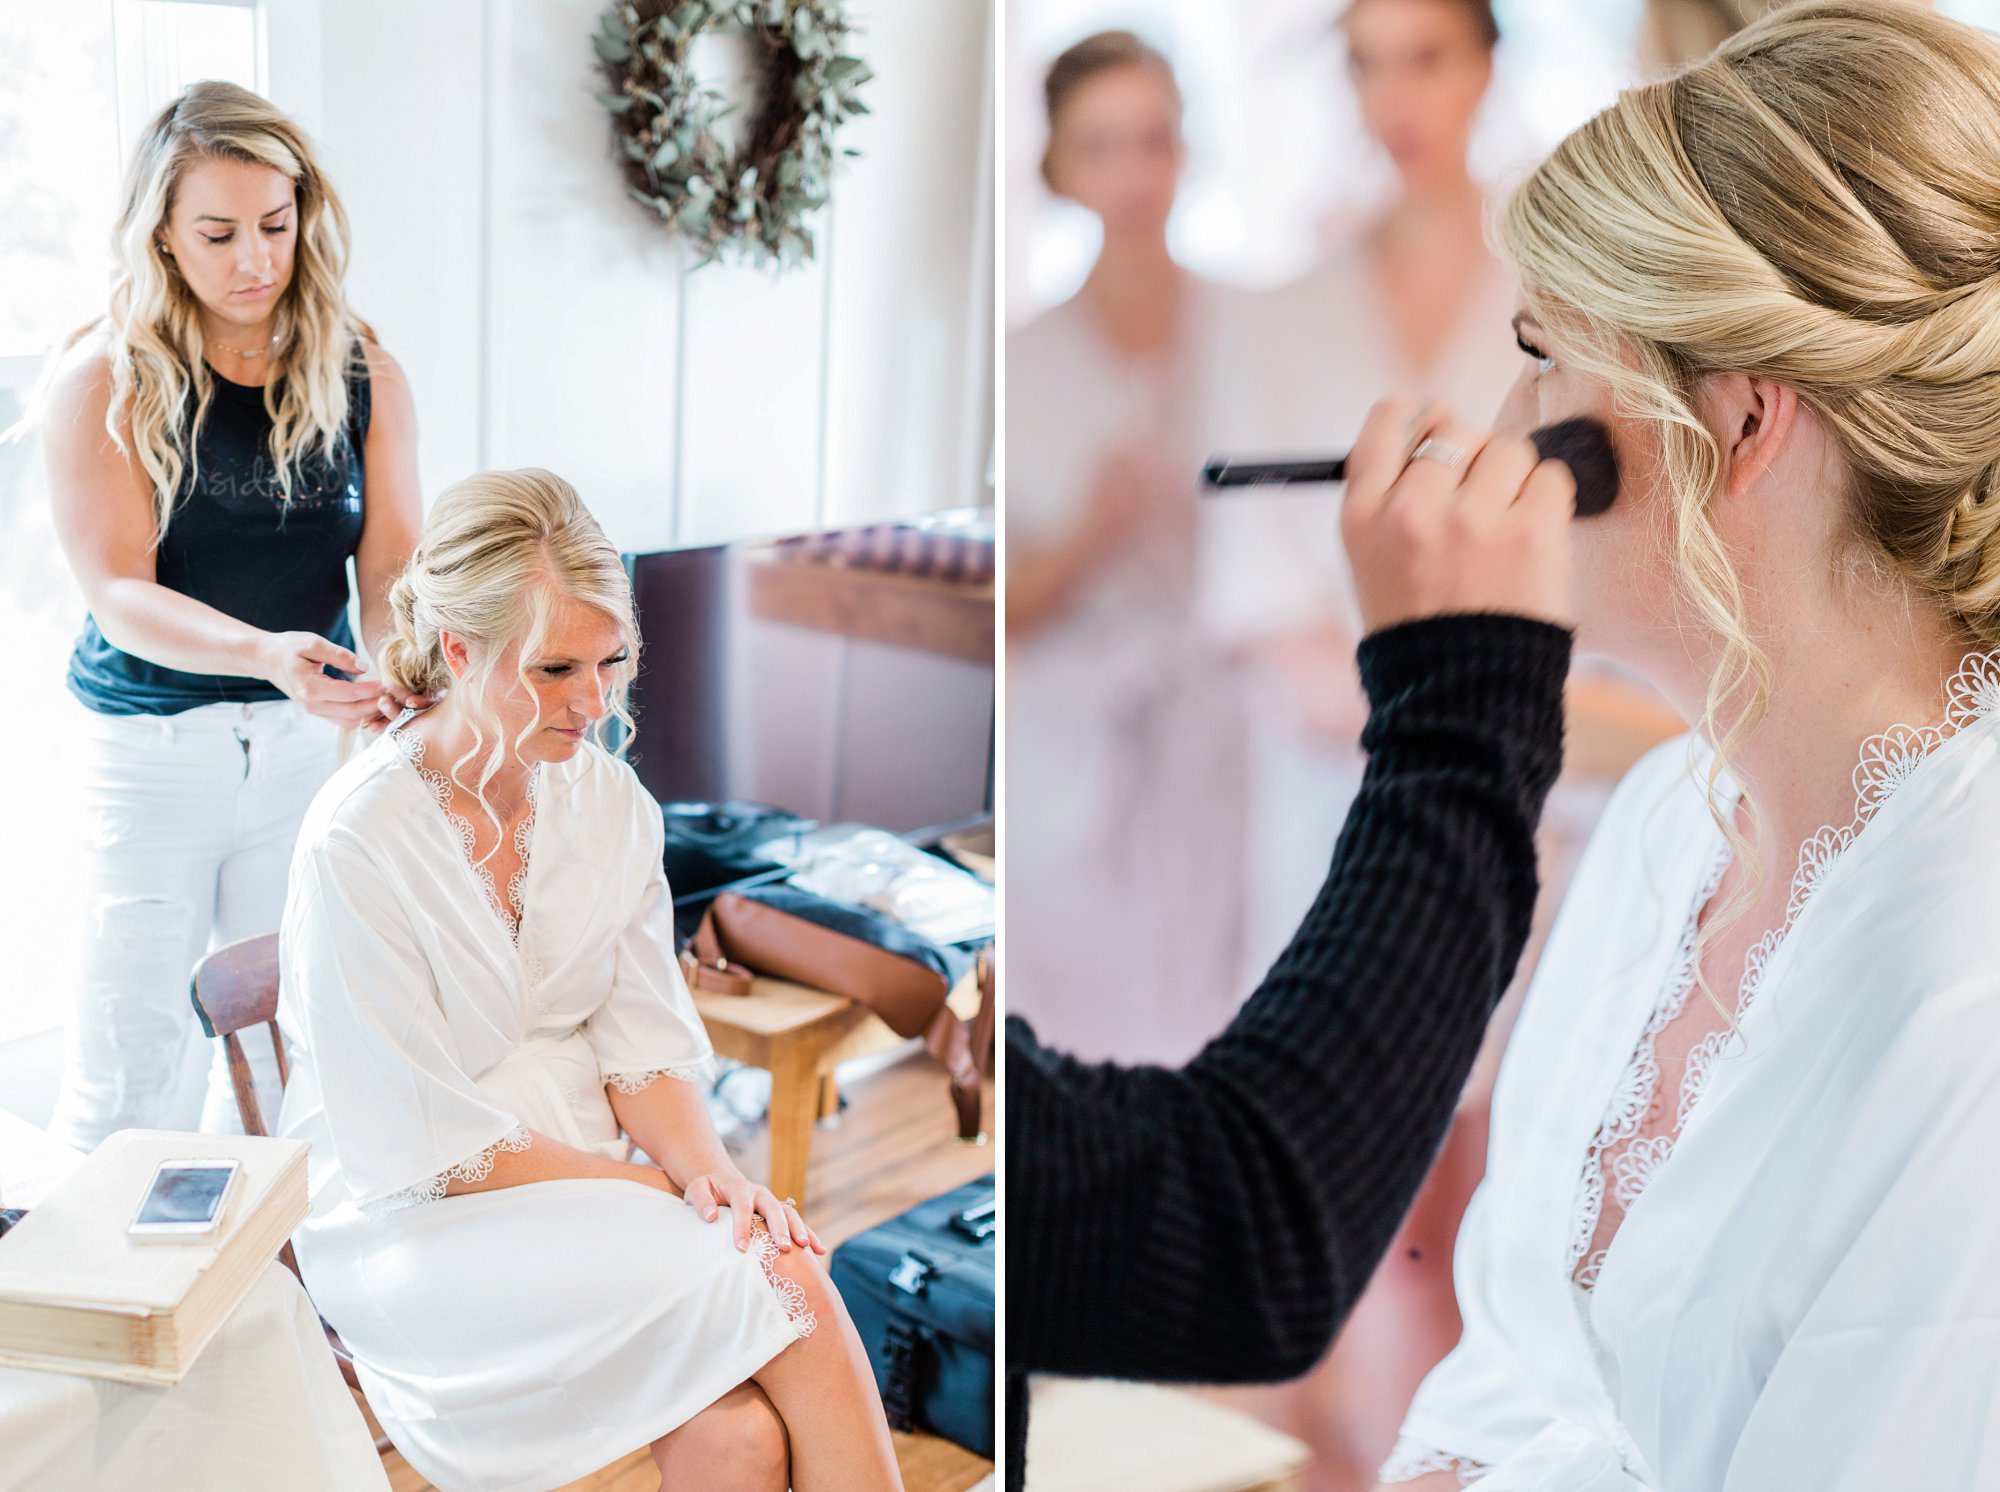 Wedding hair and makeup by InsideOut Studio, Dover NH